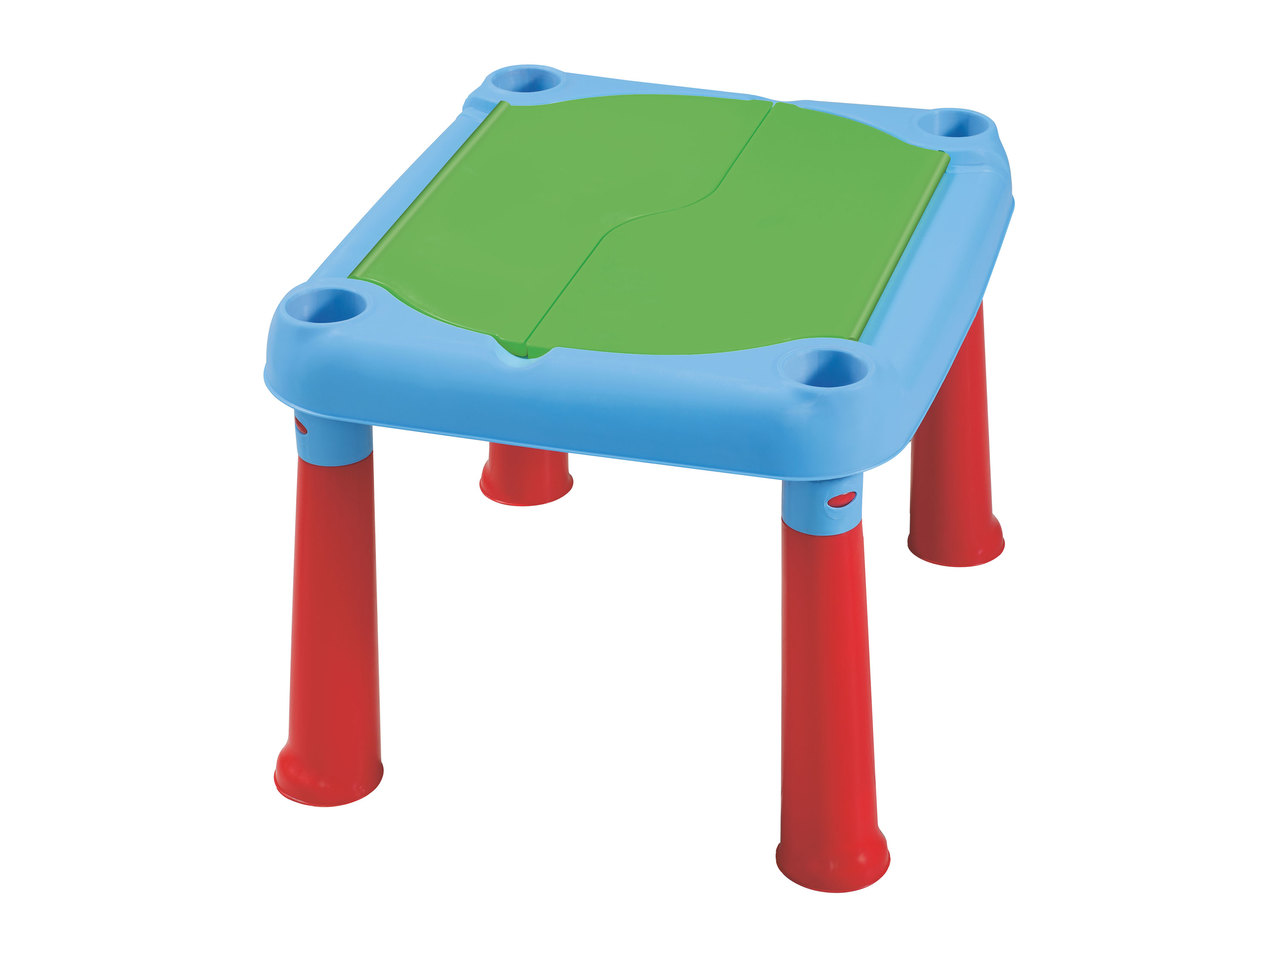 Playtive Junior Sand & Water Table1